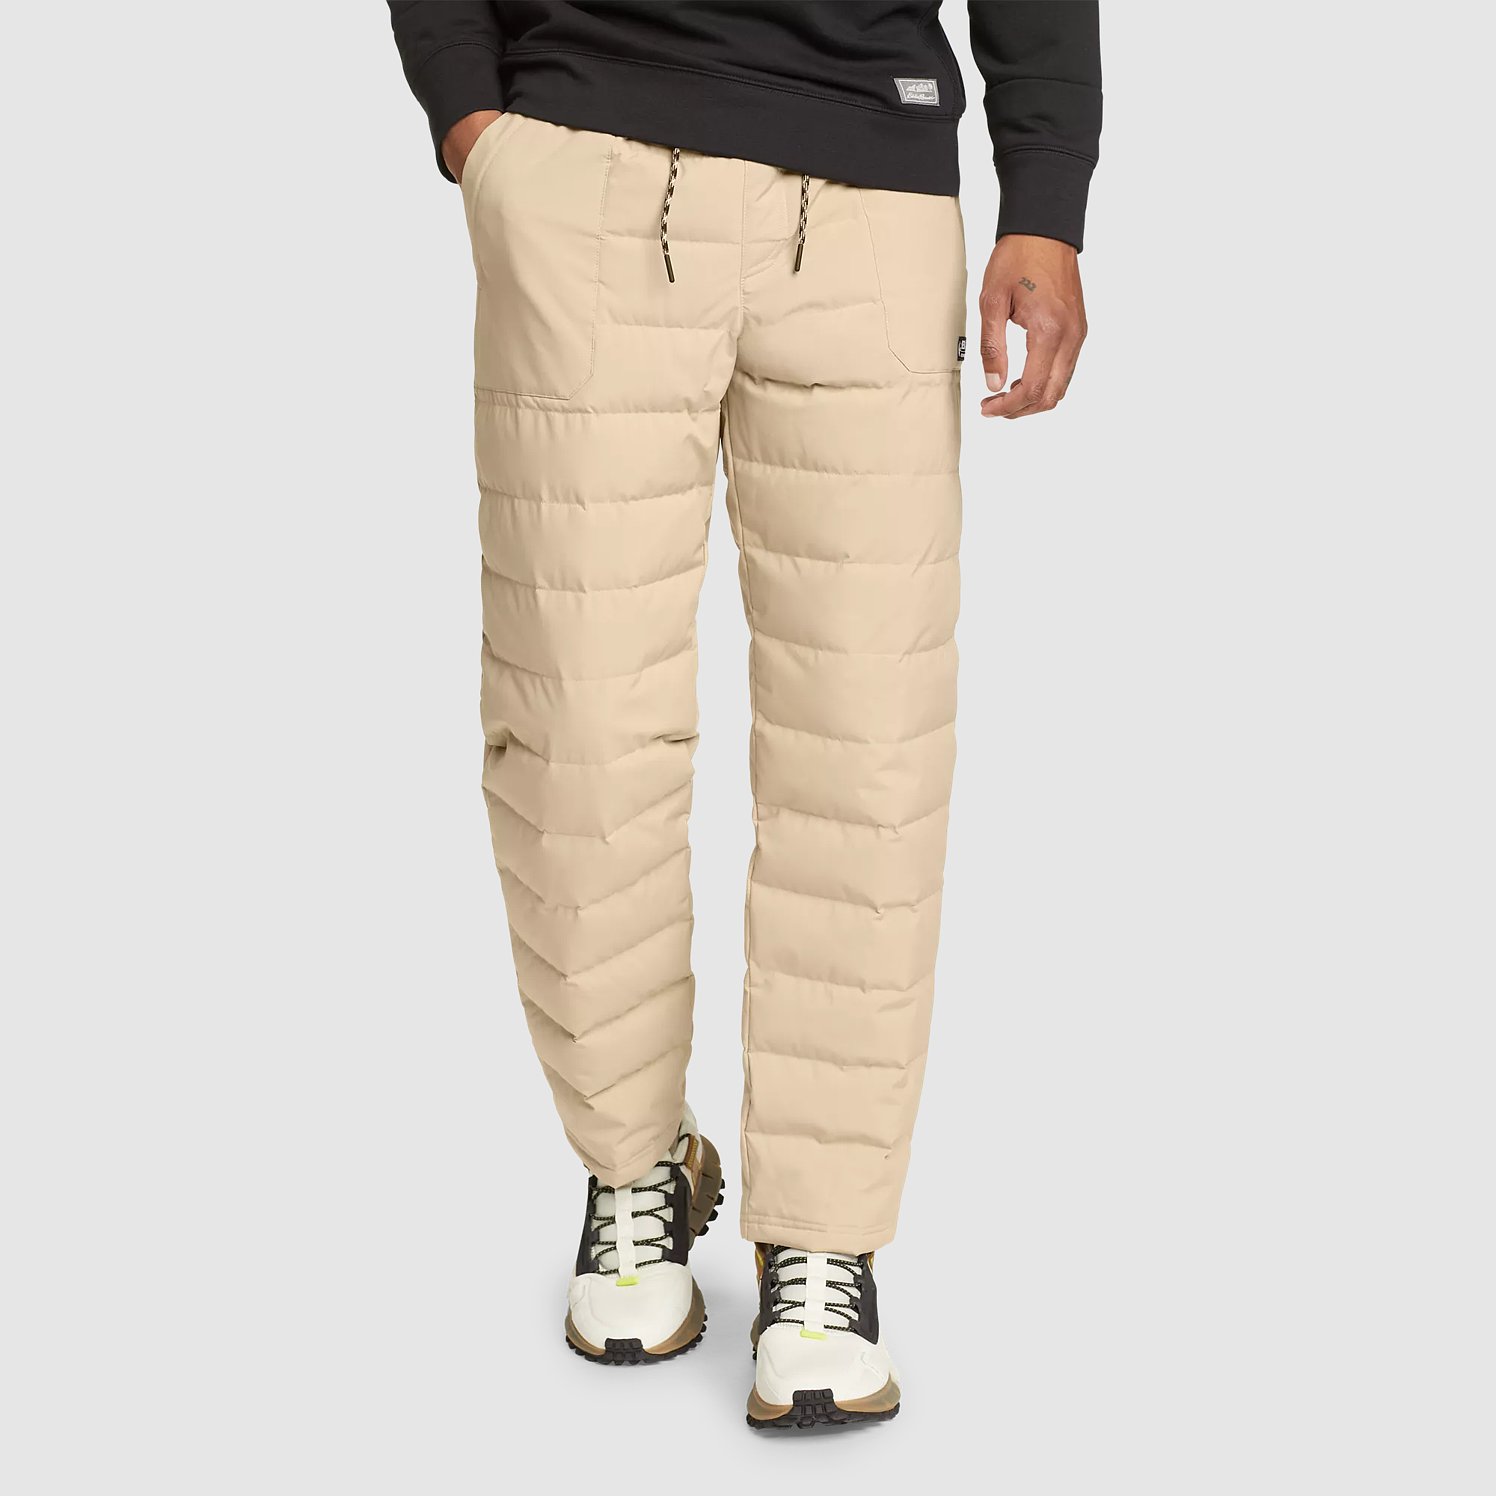 Down Insulated pants, Down Feather Pants